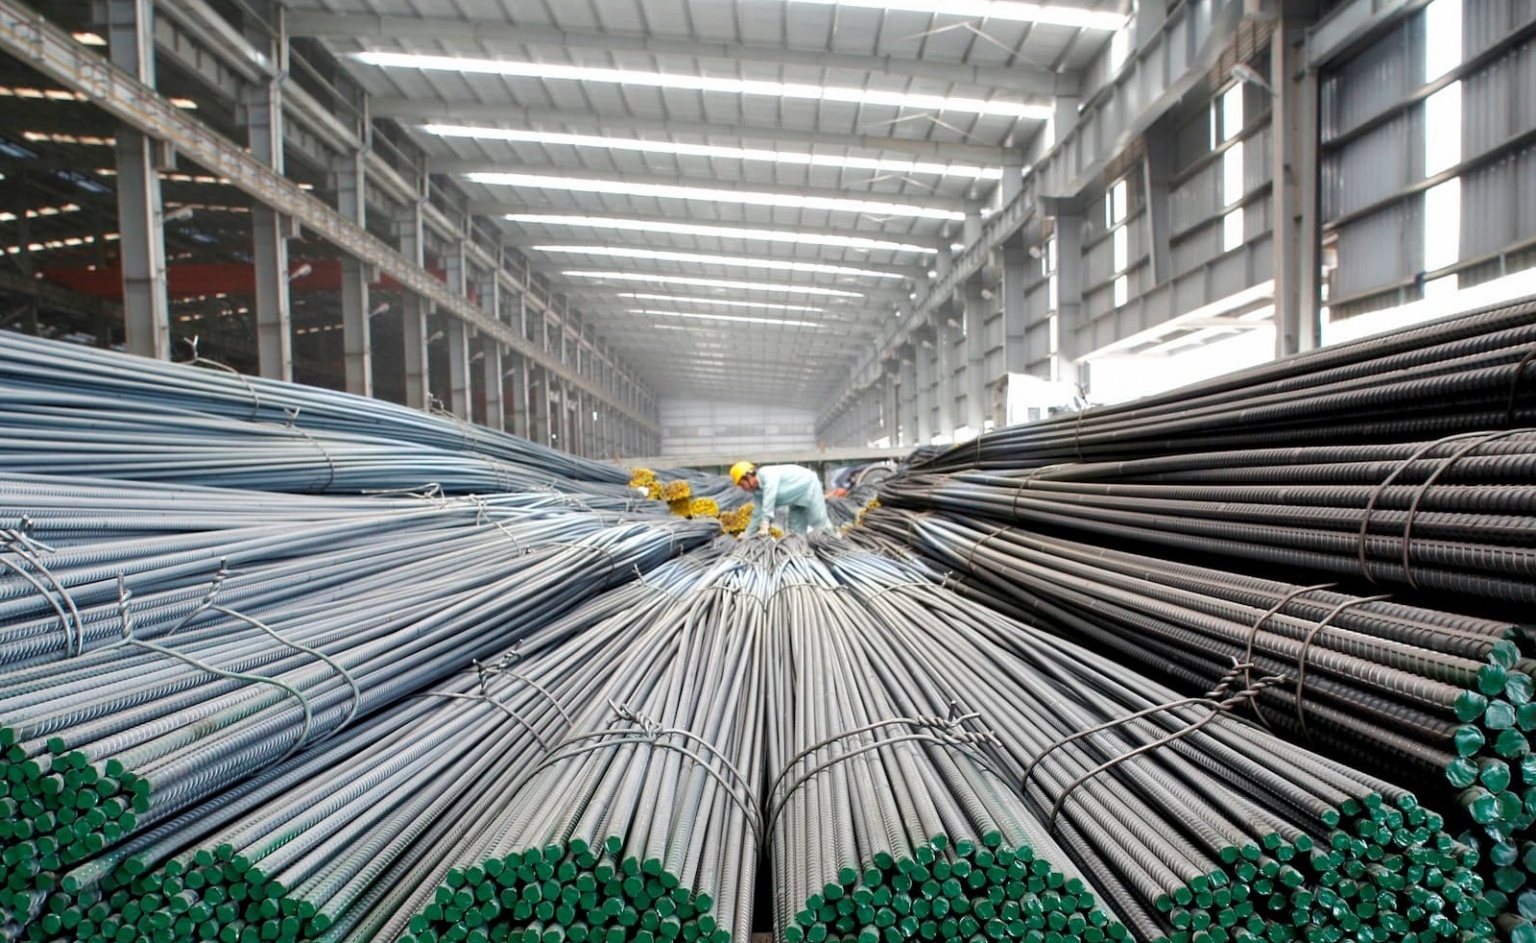 Construction steel price soars threefold in one month